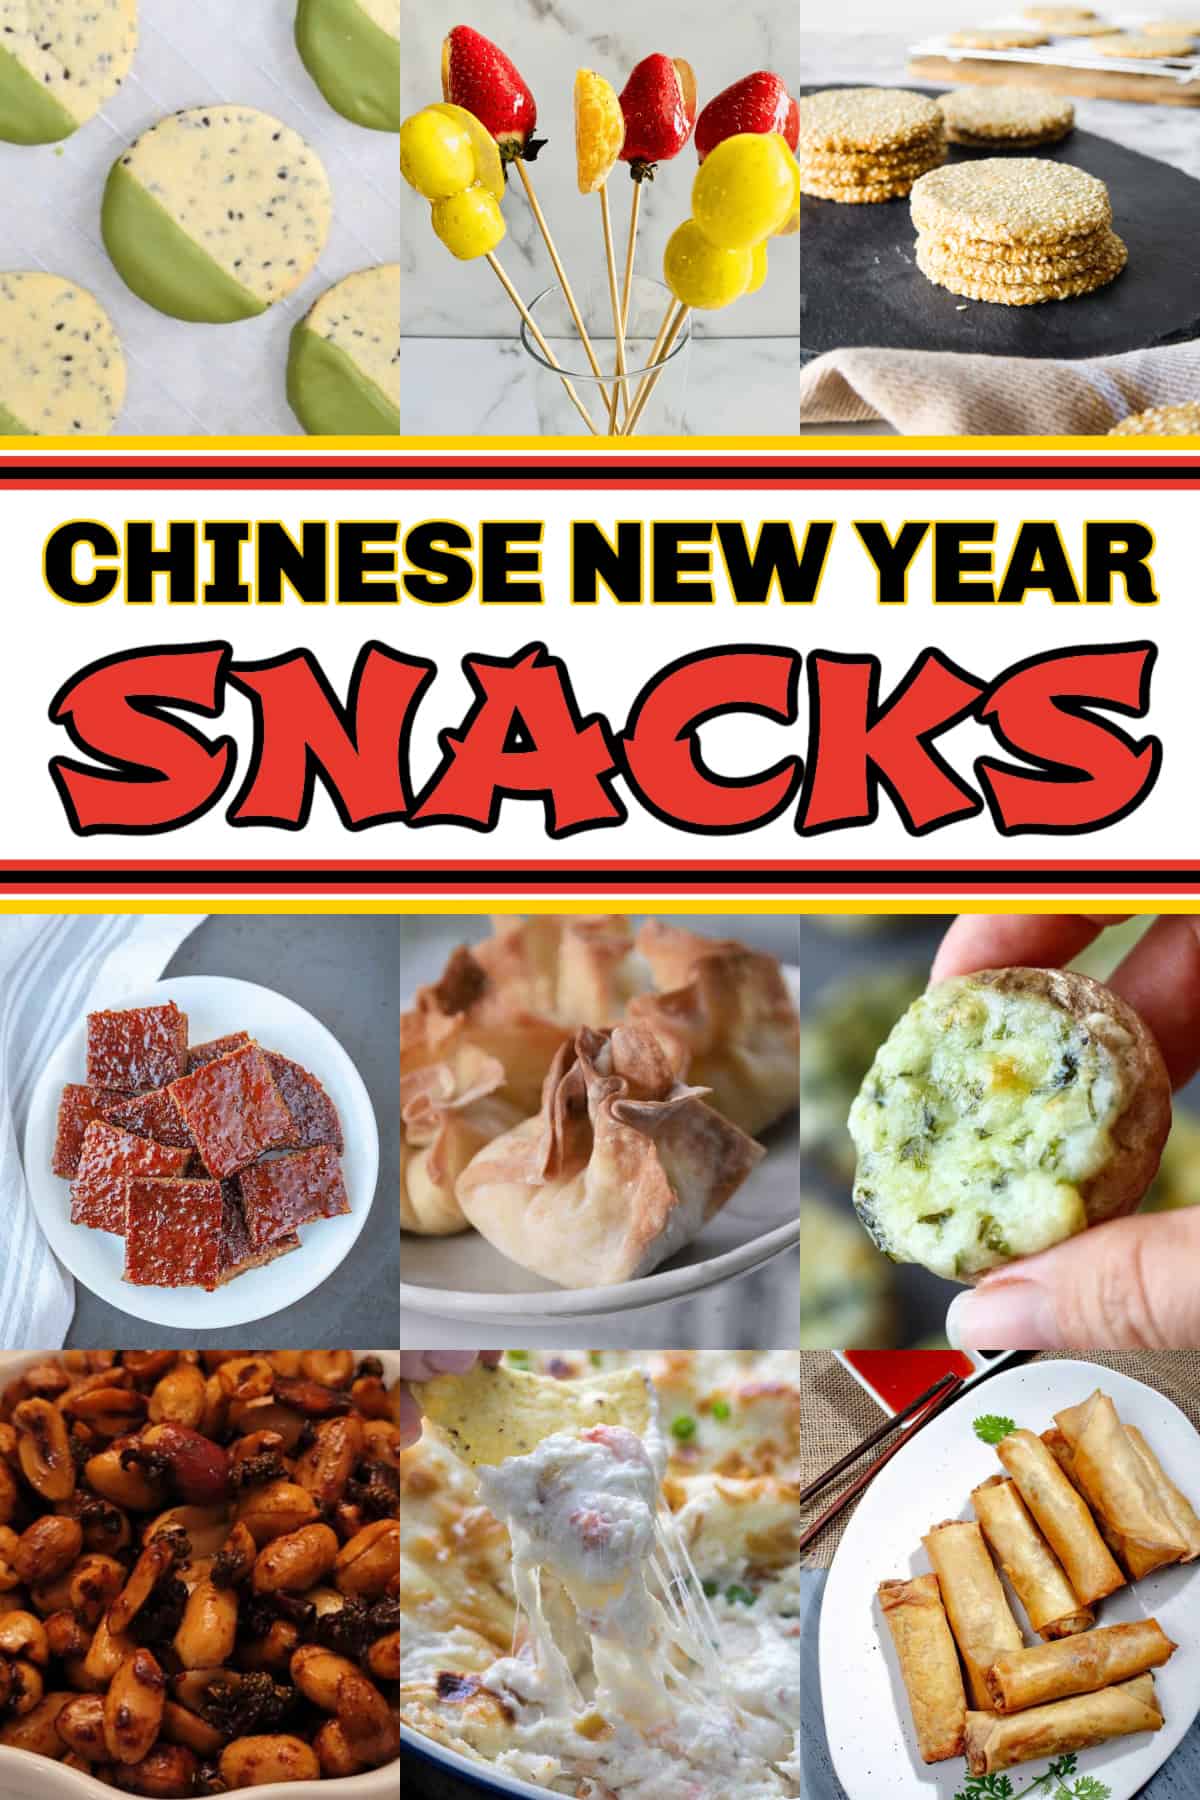 Snack for Chinese New Year